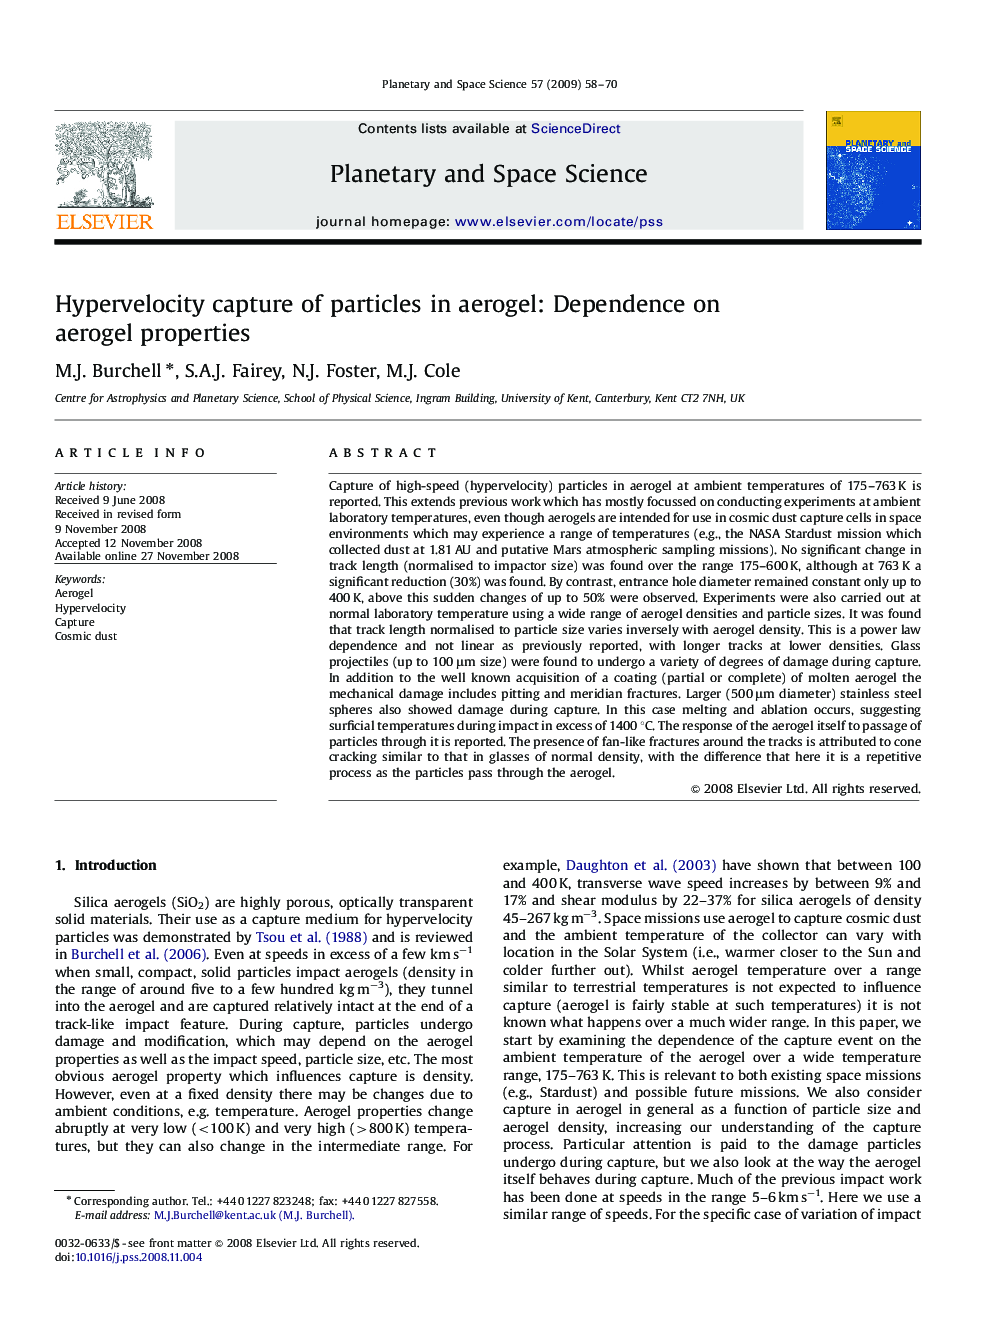 Hypervelocity capture of particles in aerogel: Dependence on aerogel properties